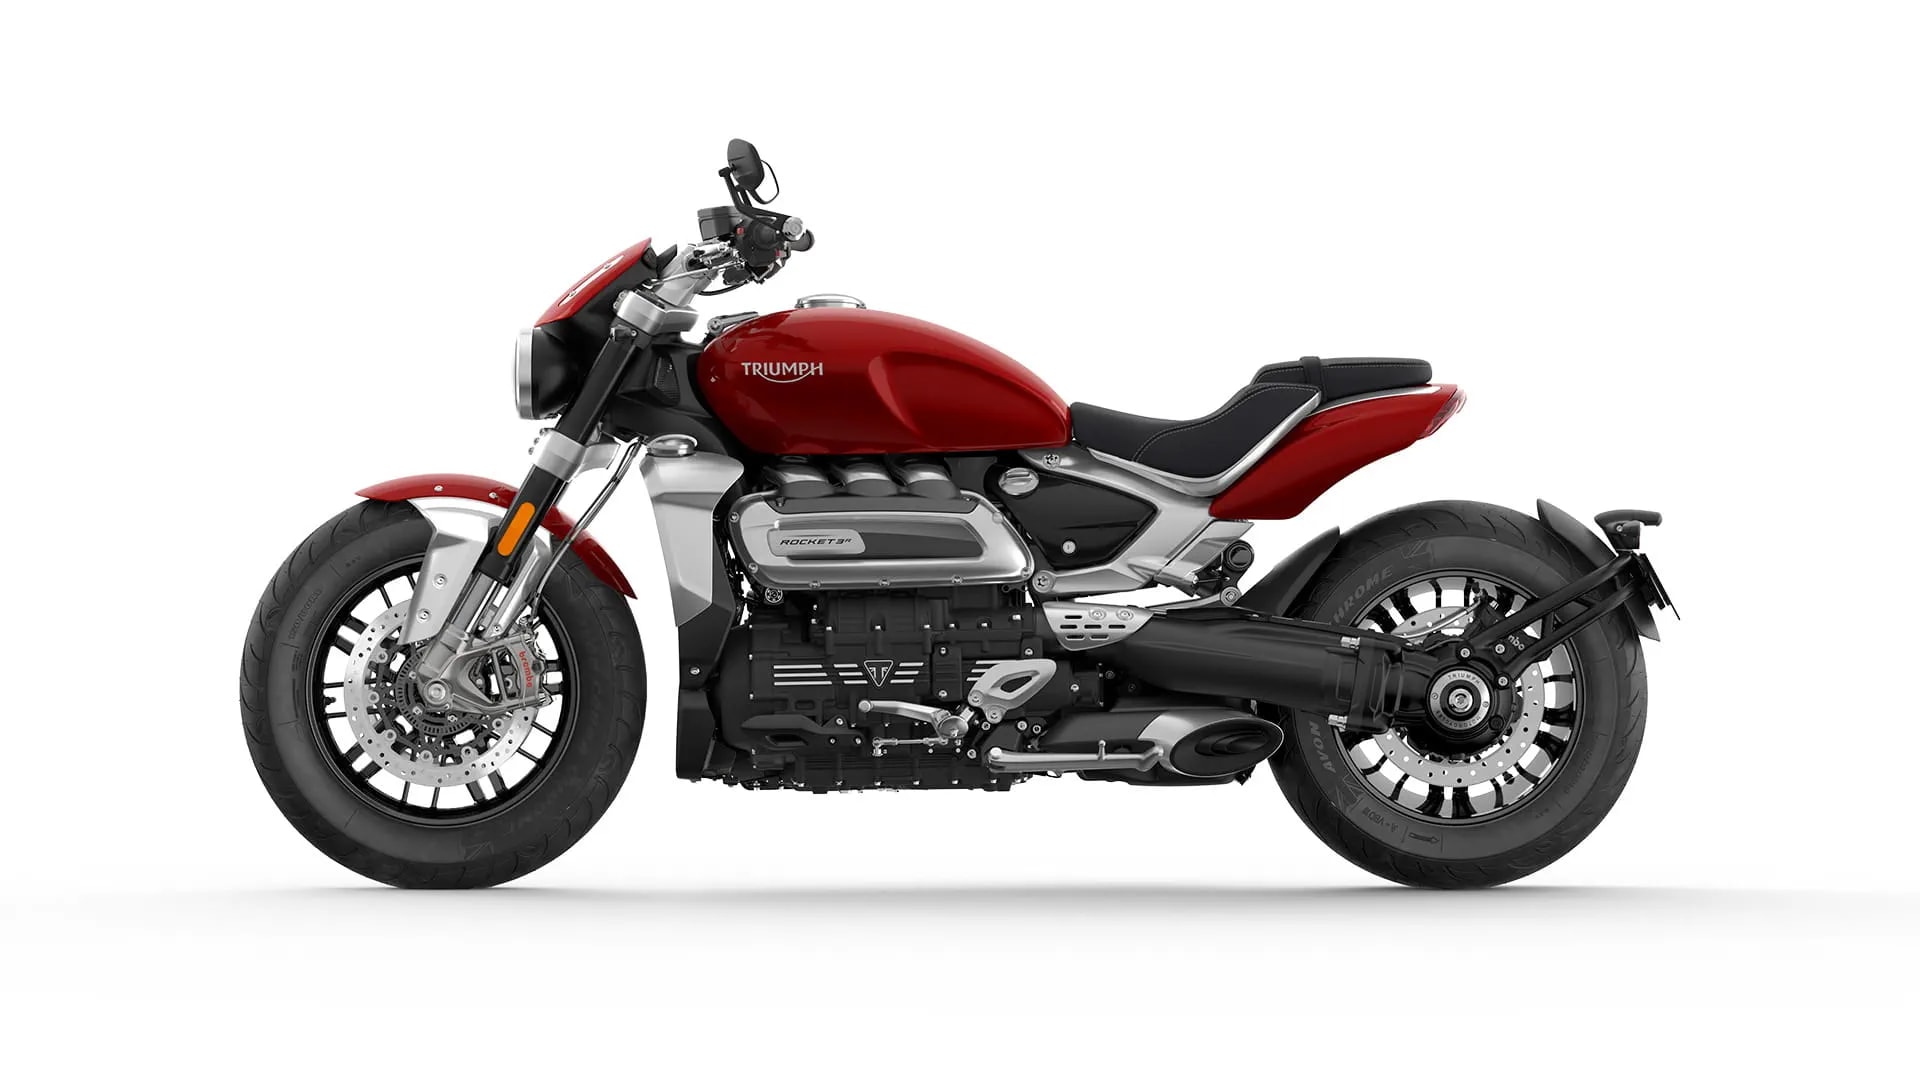 CGI Side view of the new Triumph Rocket 3 R